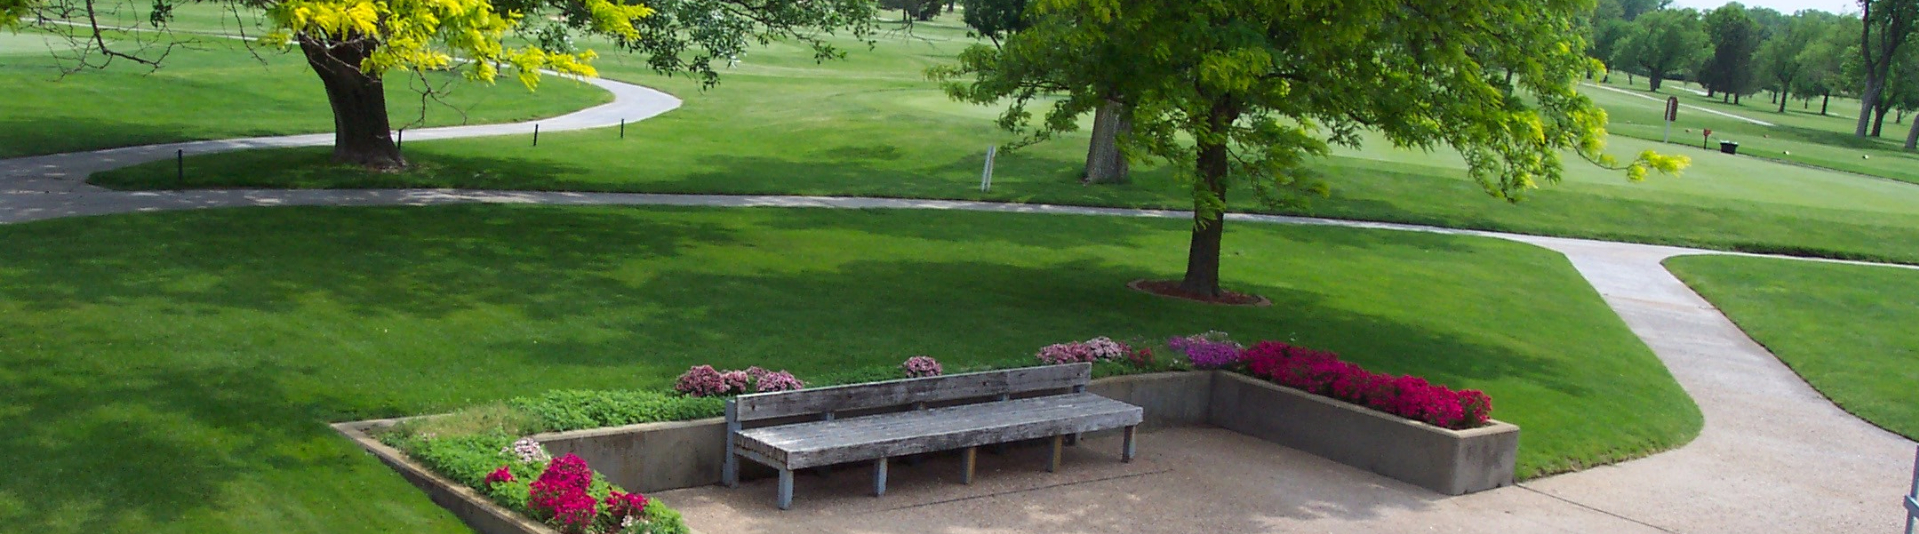 Bench at golf course surrounded by flowers 